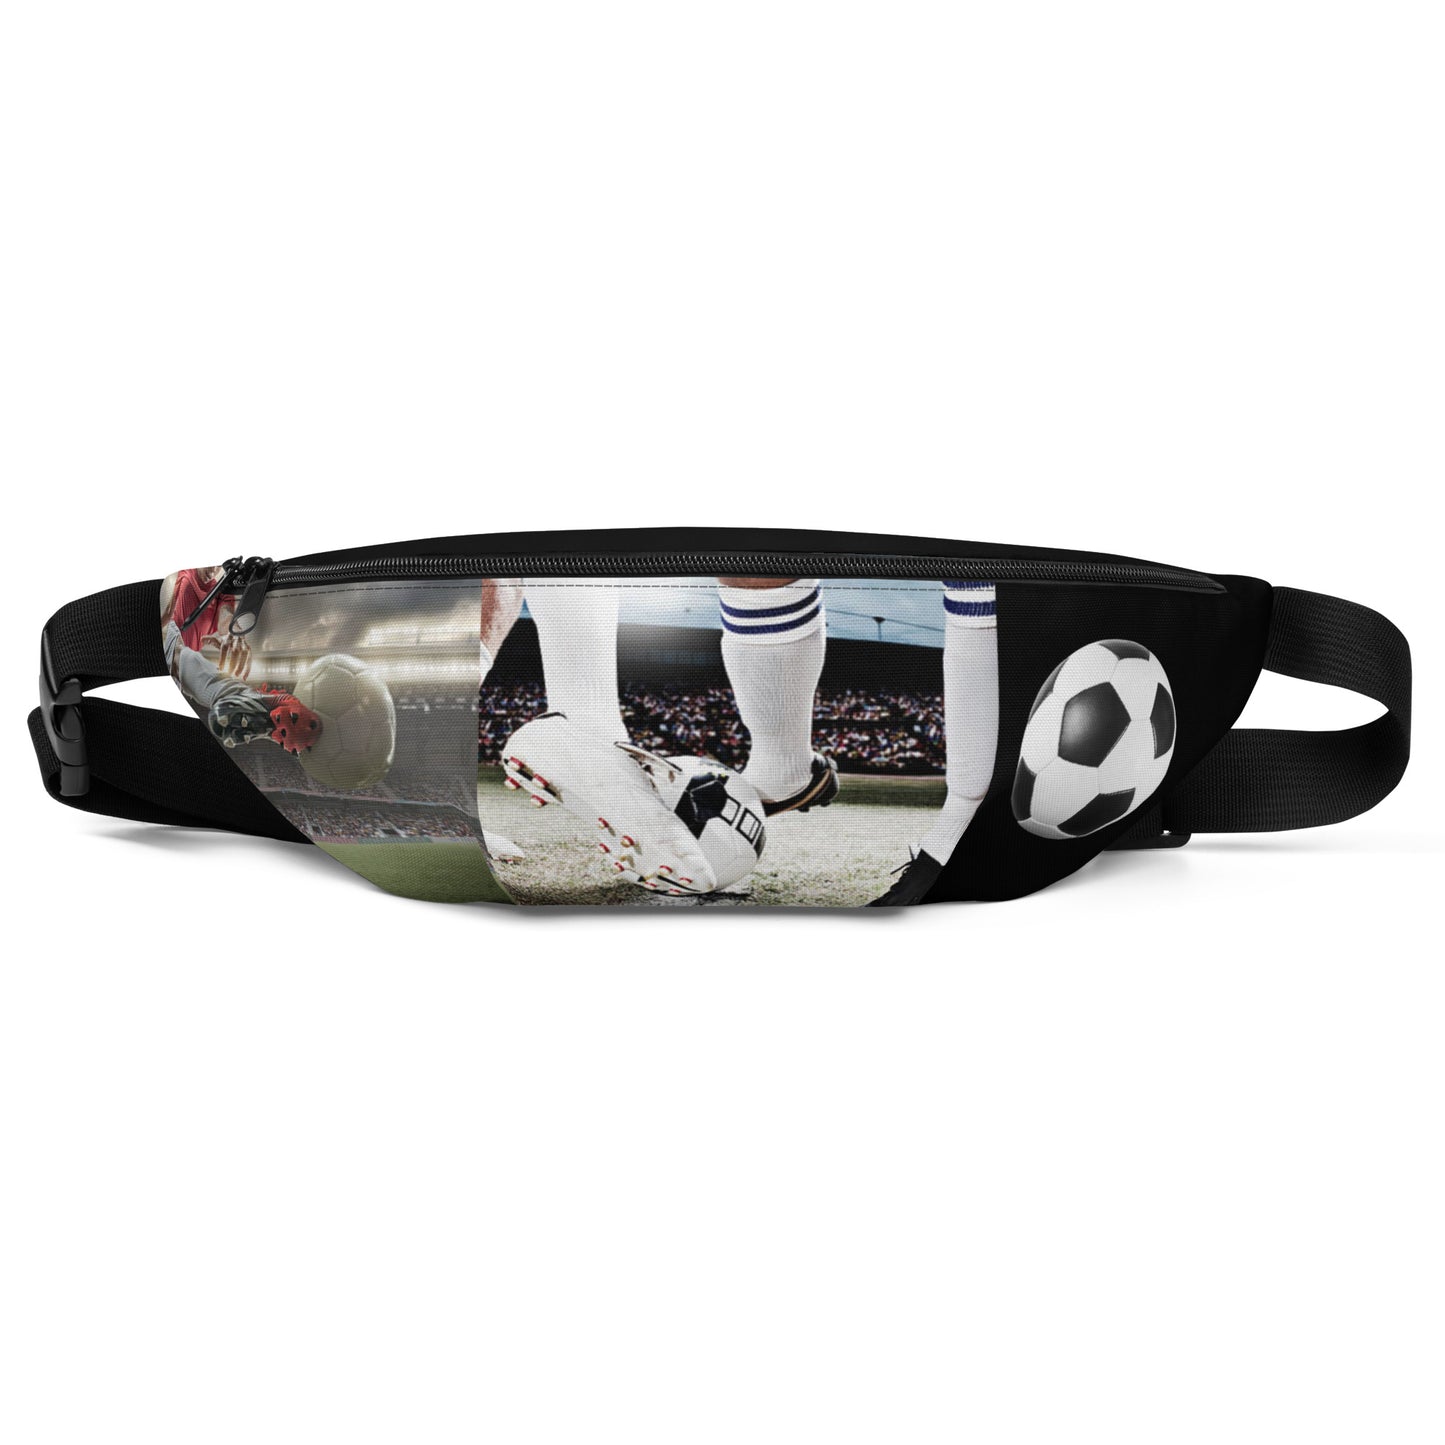 Soccer Life 954 Signature Fanny Pack